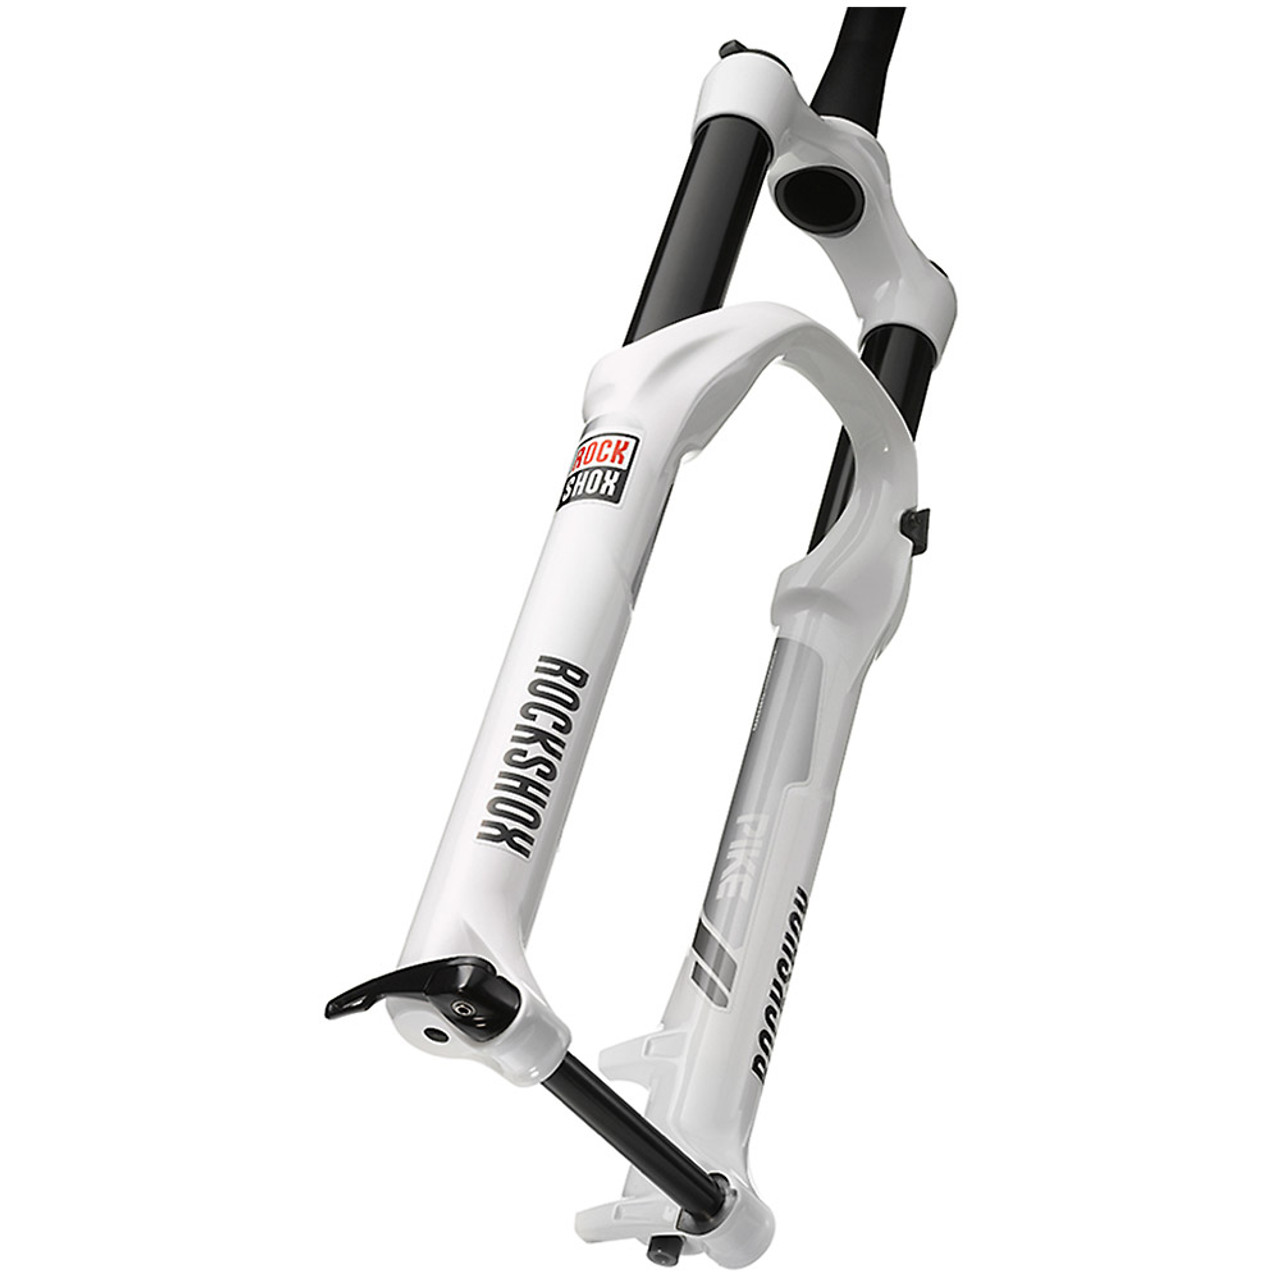 Texas Cyclesport Rock Shox Pike Rct3 29 Dual Position 150mm White Suspension Fork Rs Pik Ds W 